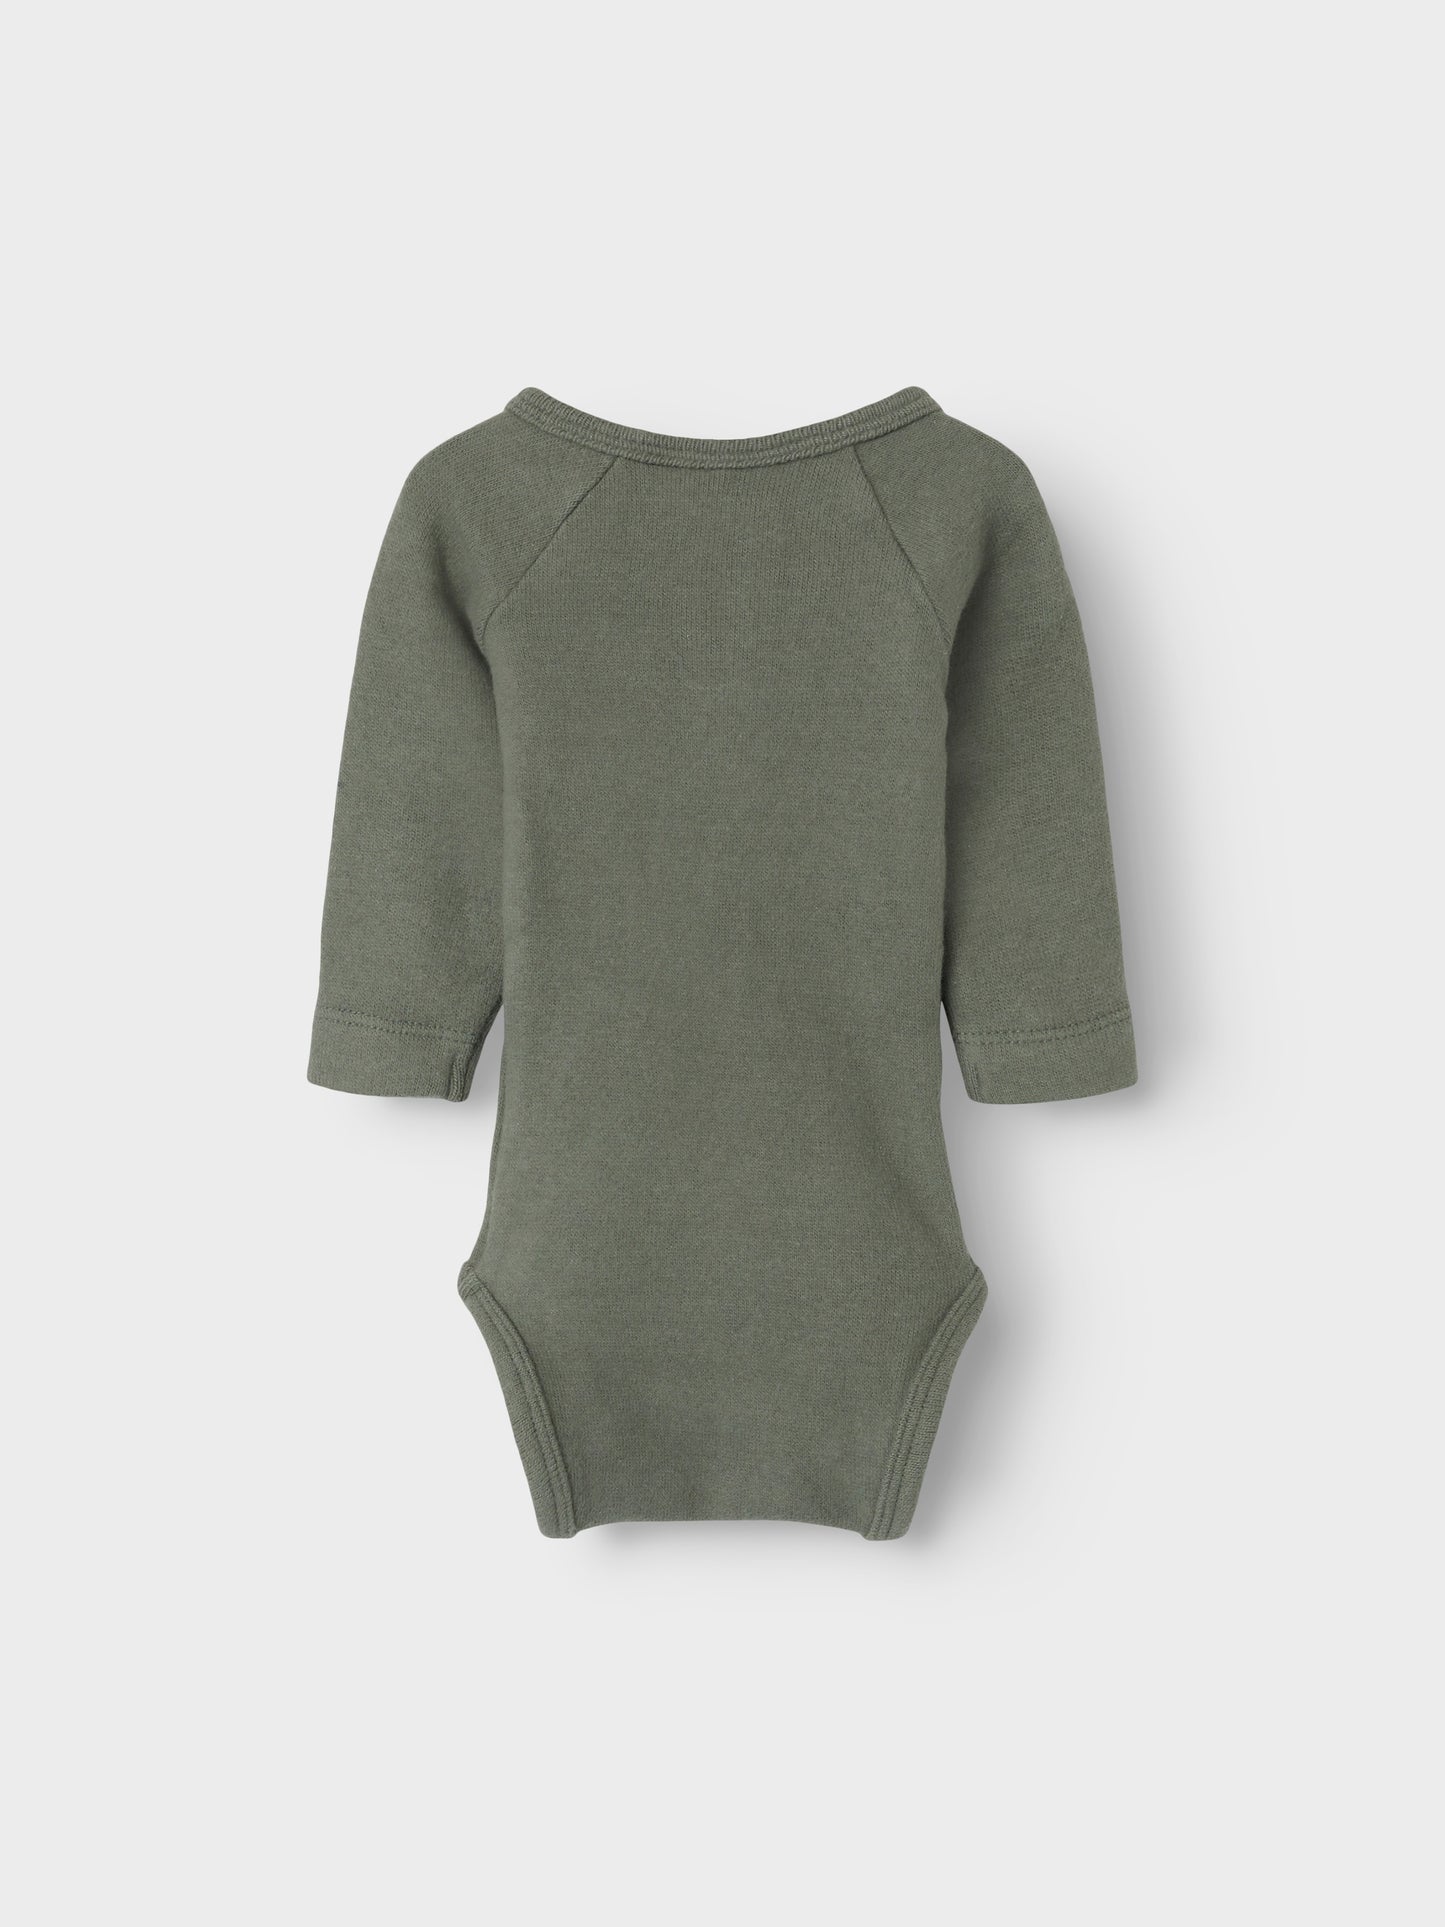 Lil atelier - romper - agave green